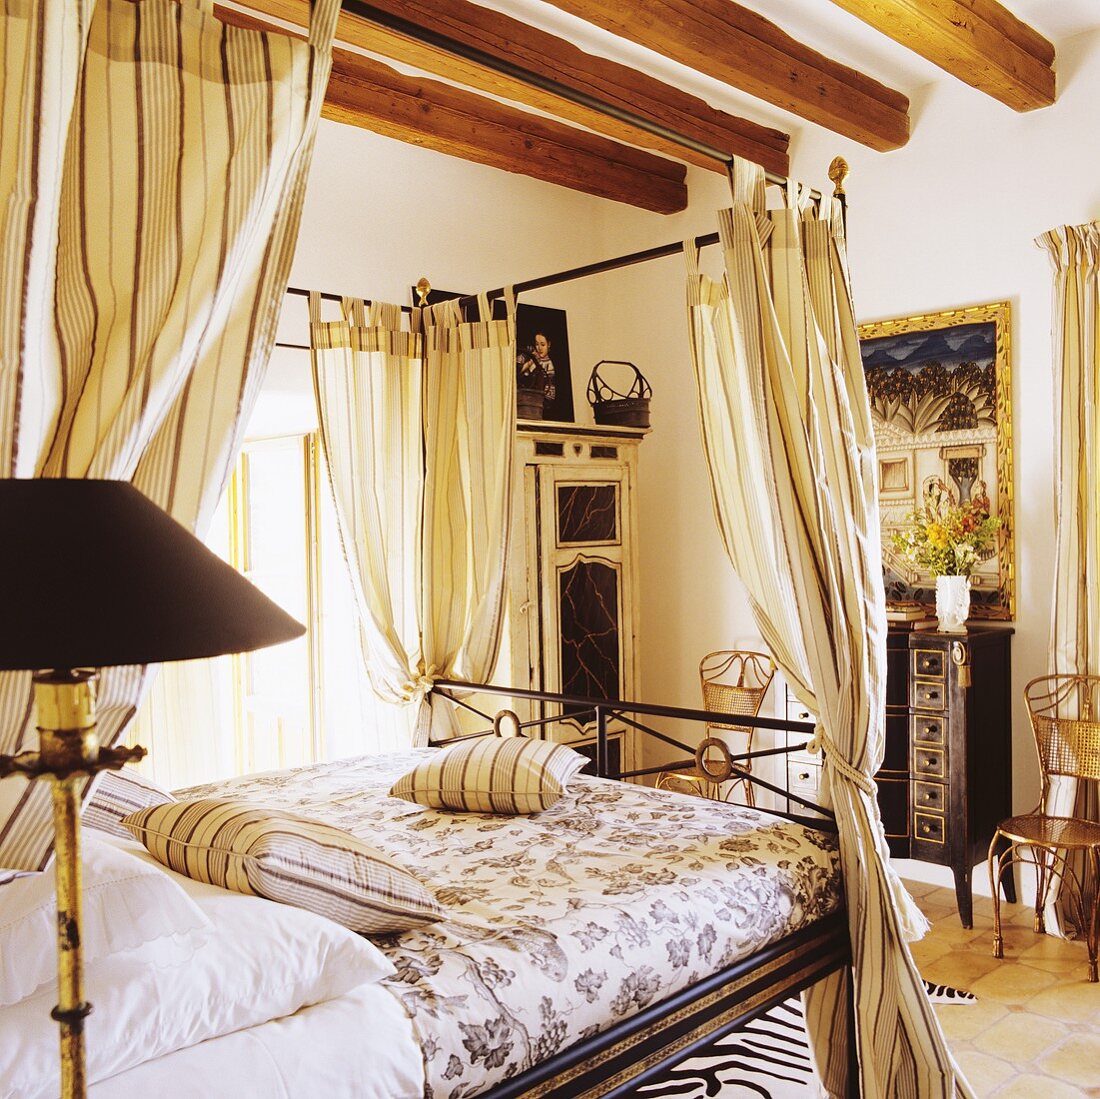 A delicate four poster bed under a rustic wood beam ceiling